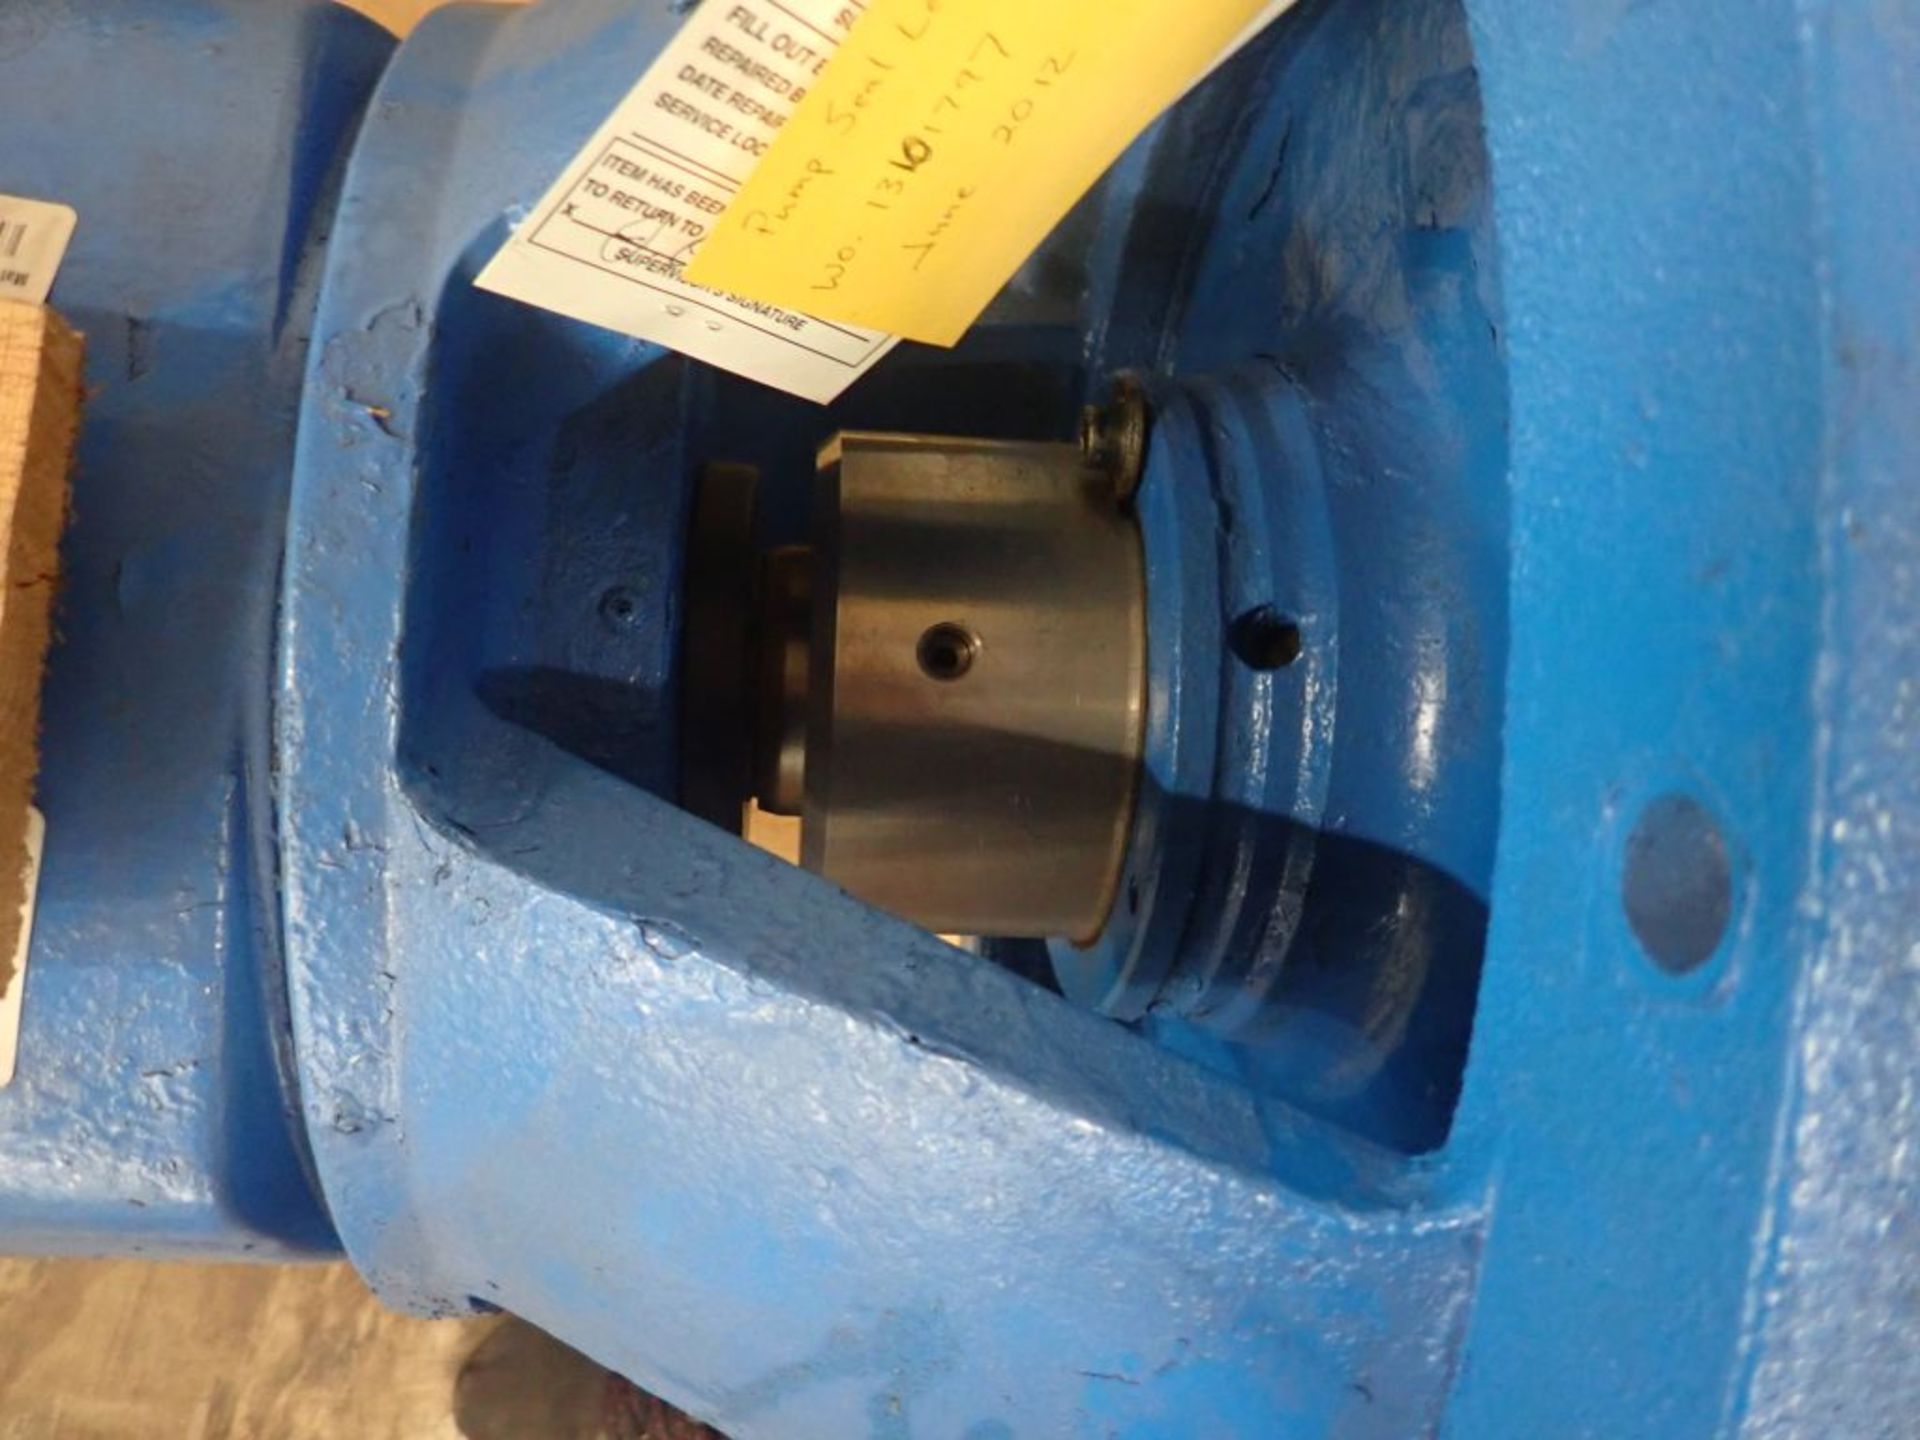 ABS Pullout Pump Subassembly - NB 8 x 6 x 19; Type: 4F; Tag: 215863 - Image 6 of 7